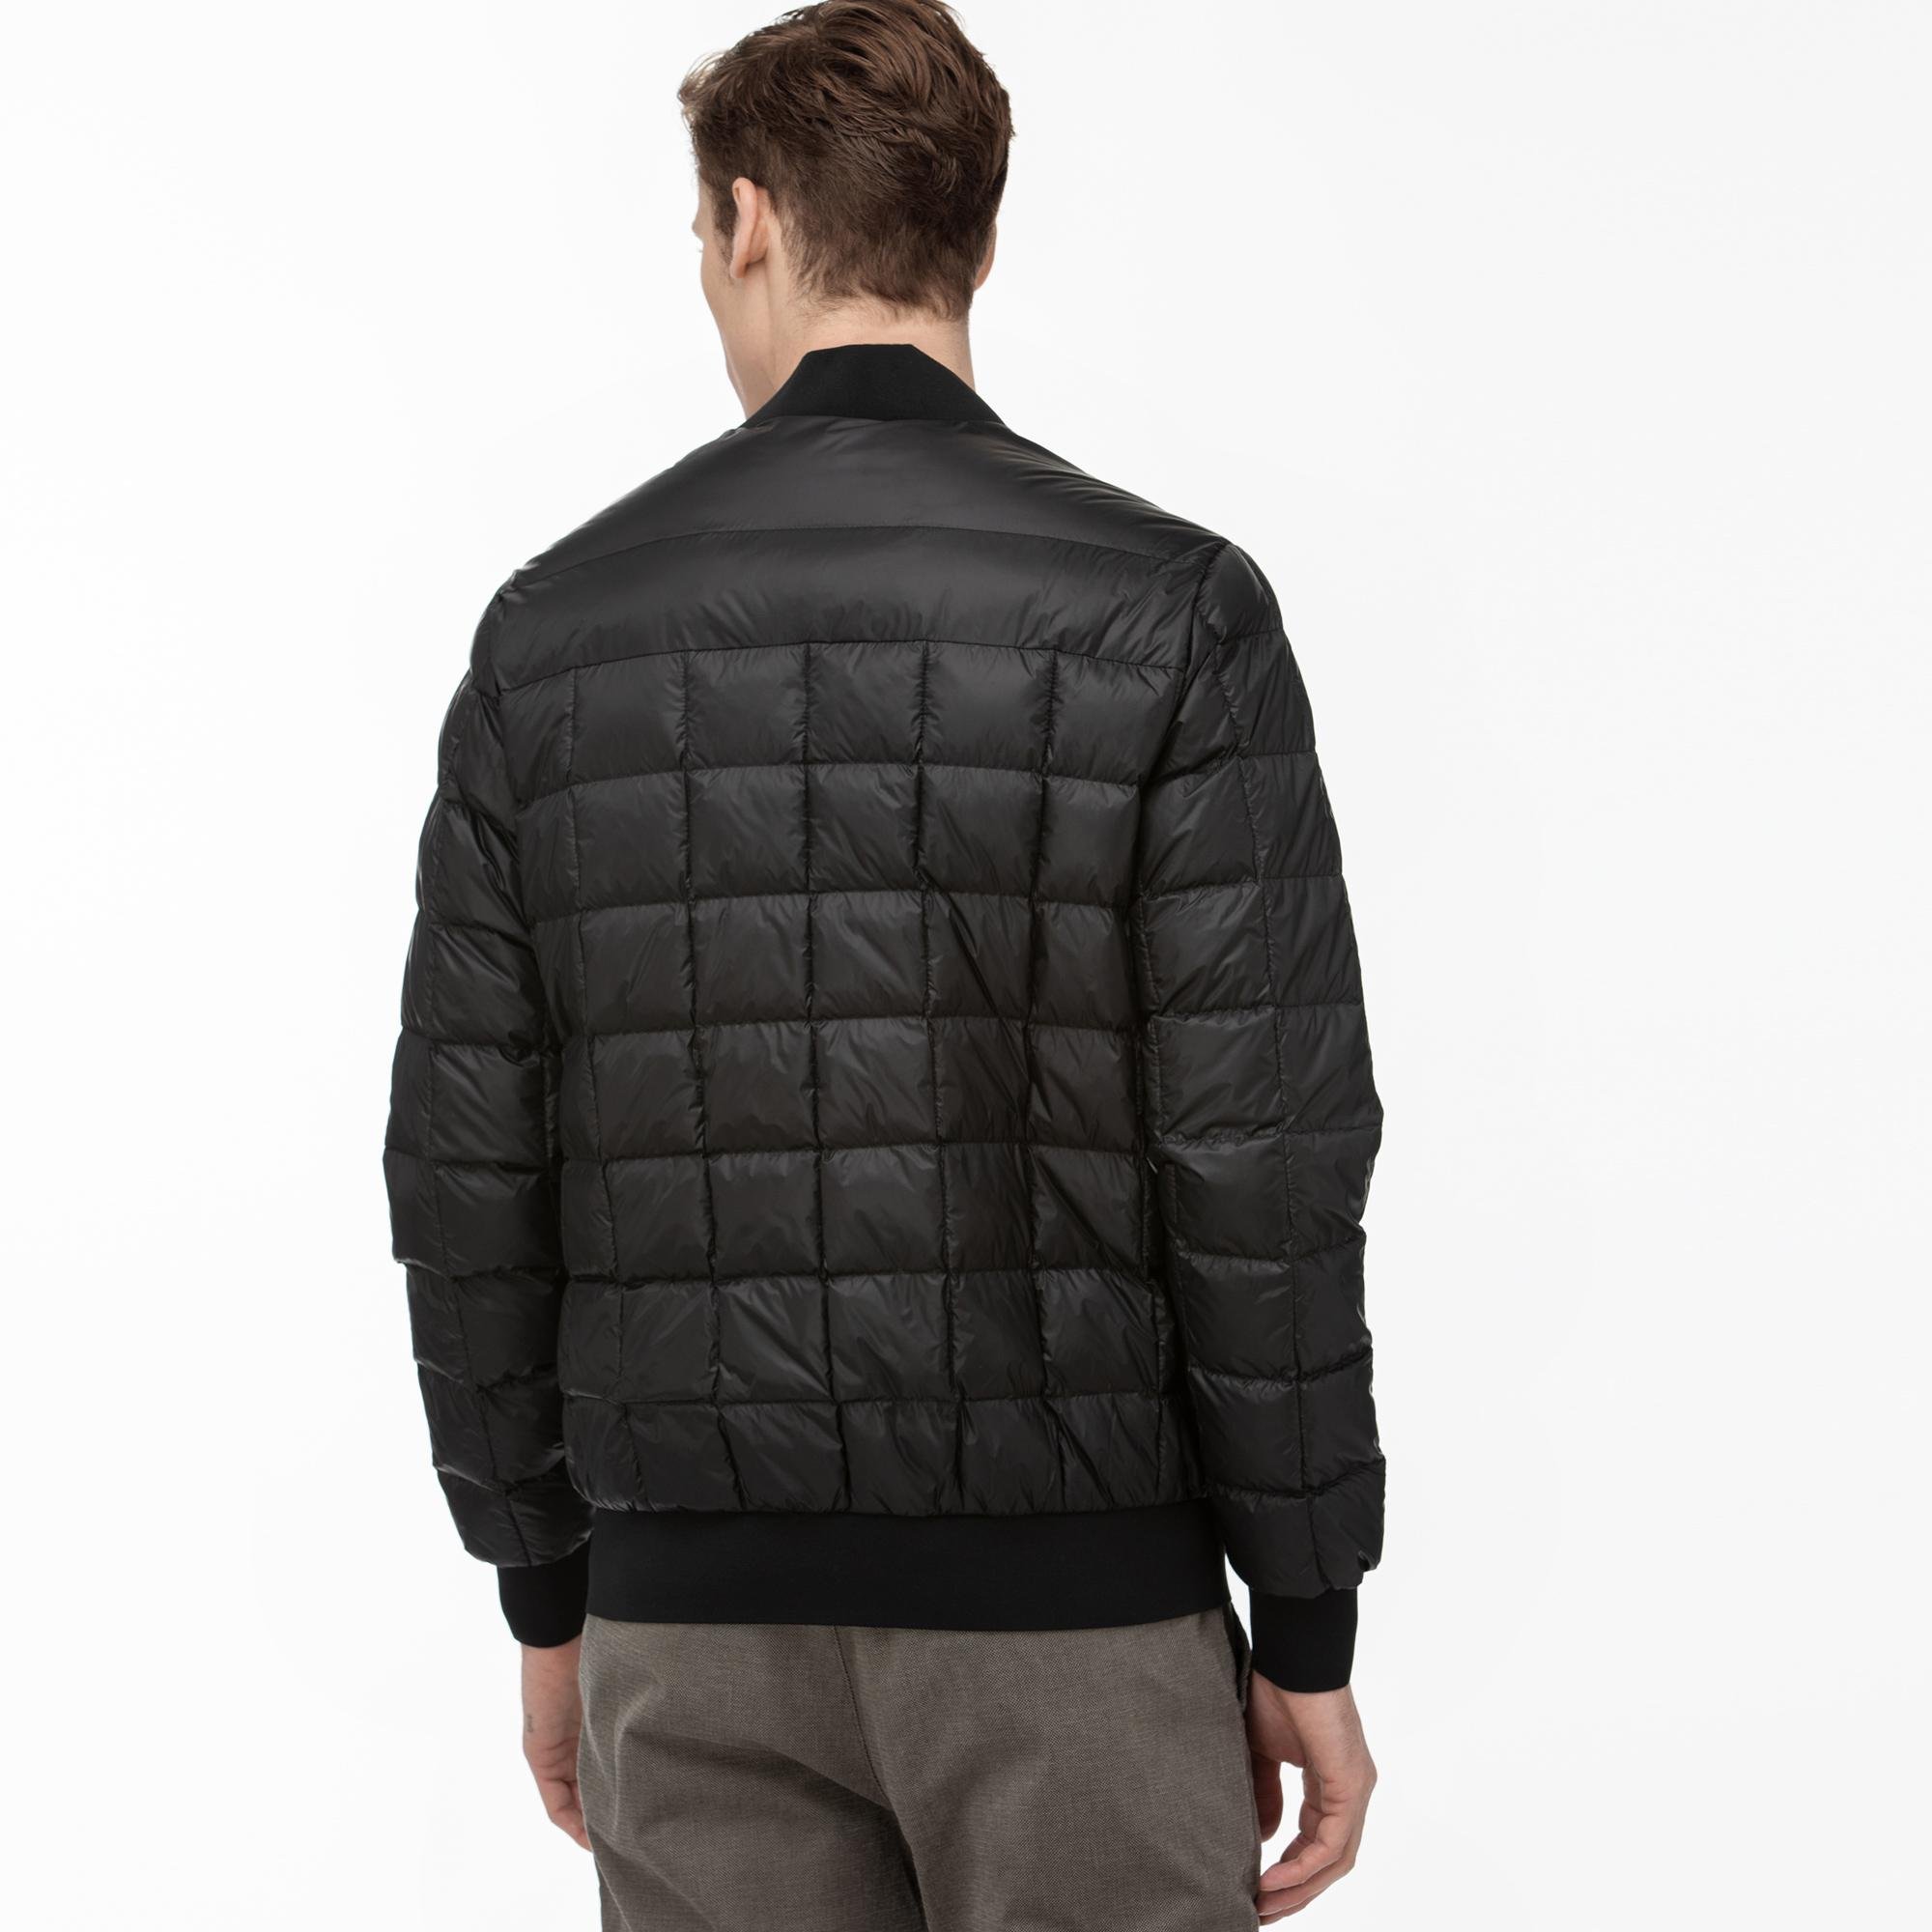 Lacoste Men's Quilted Jacket